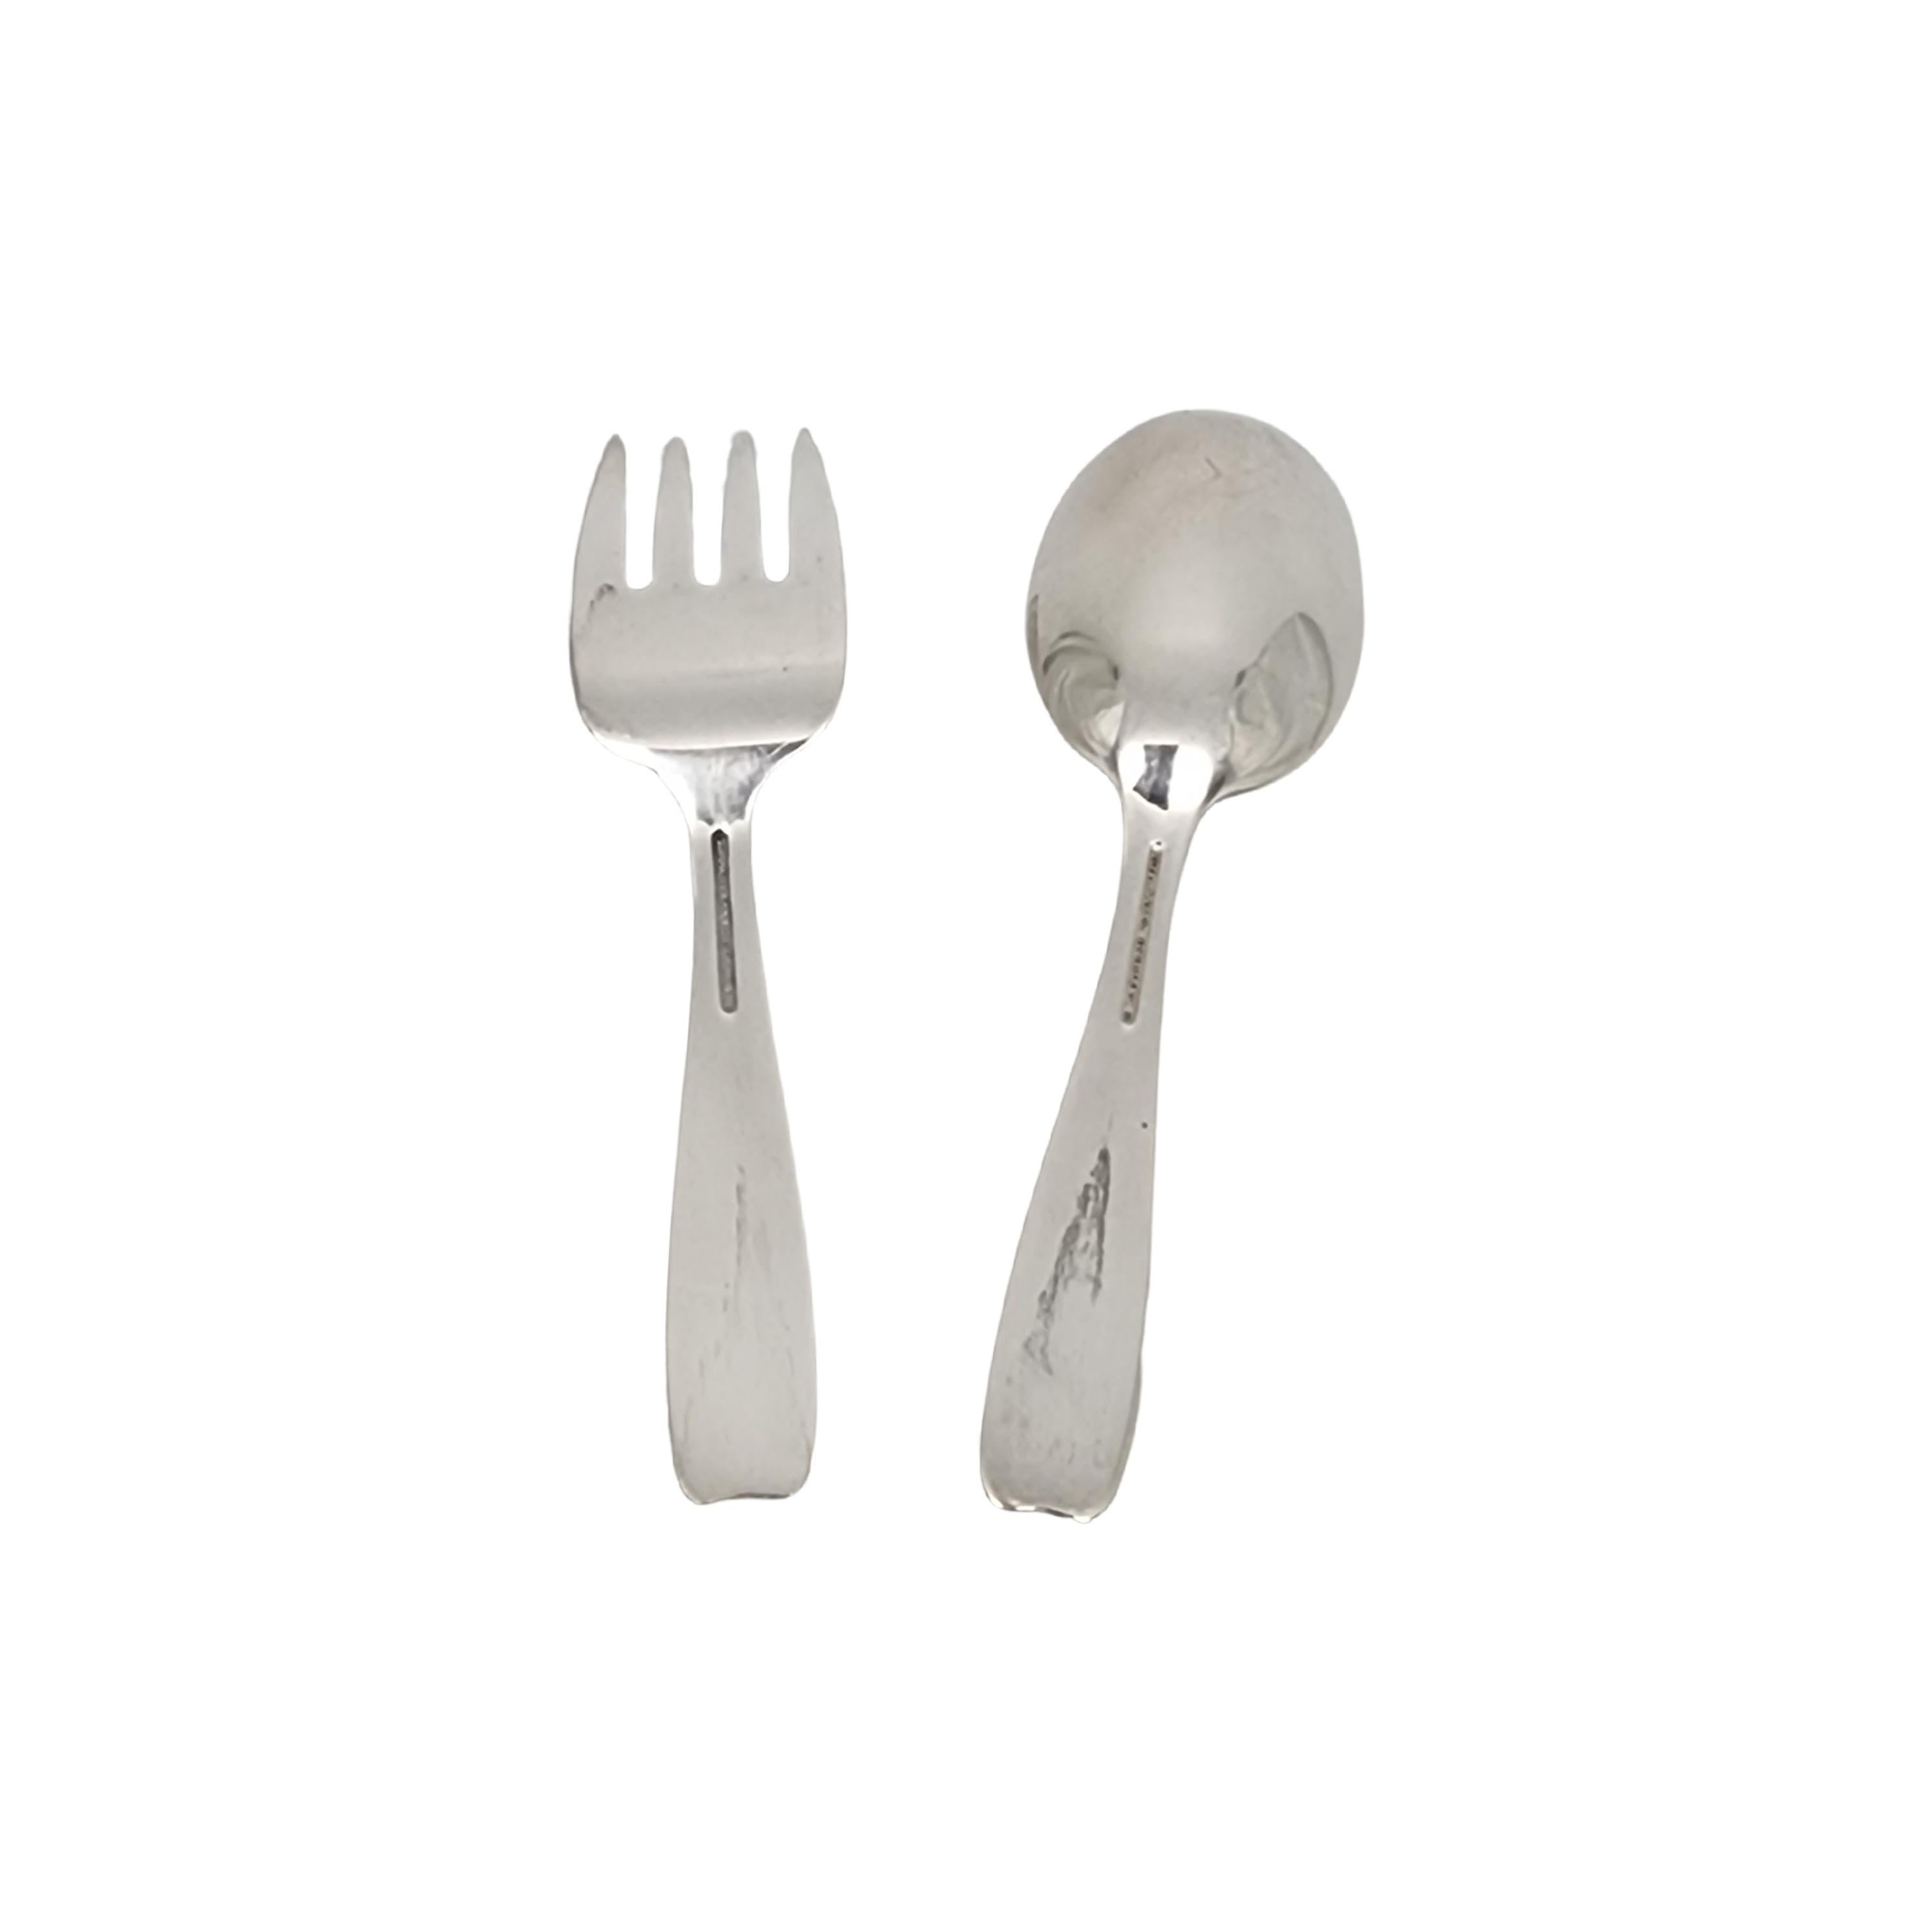 Tiffany & Co sterling silver child/baby feeding fork and spoon in the Cordis pattern.

No monogram or engraving

A small fork and spoon in the Cordis pattern, a simple and classic design. Hallmarks date this piece to manufacture under the